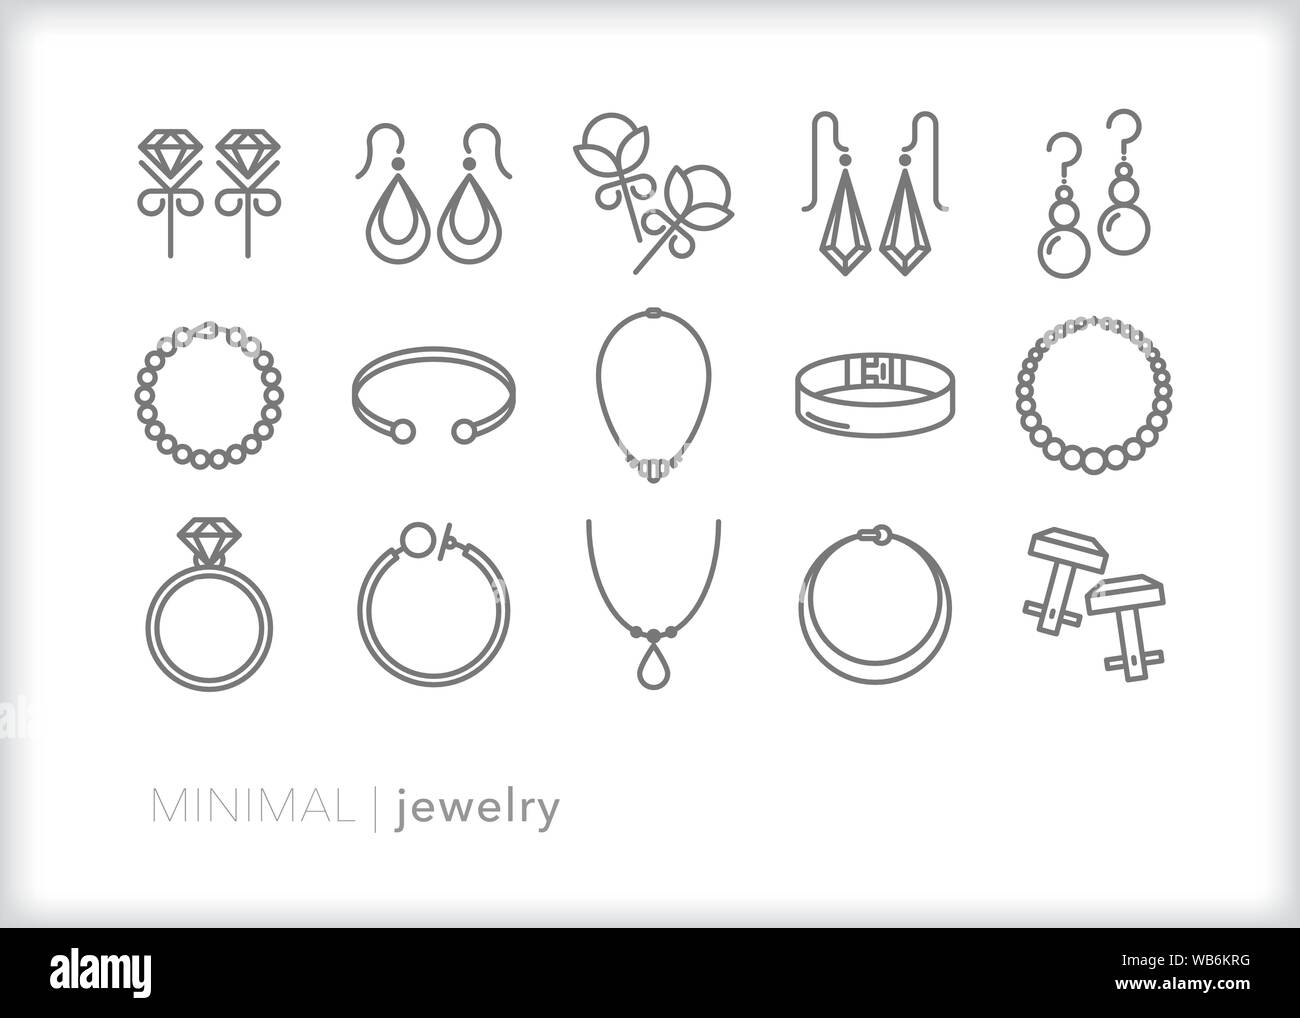 Set of 15 jewelry line icons of earrings, bracelets, rings and necklace accessories Stock Vector